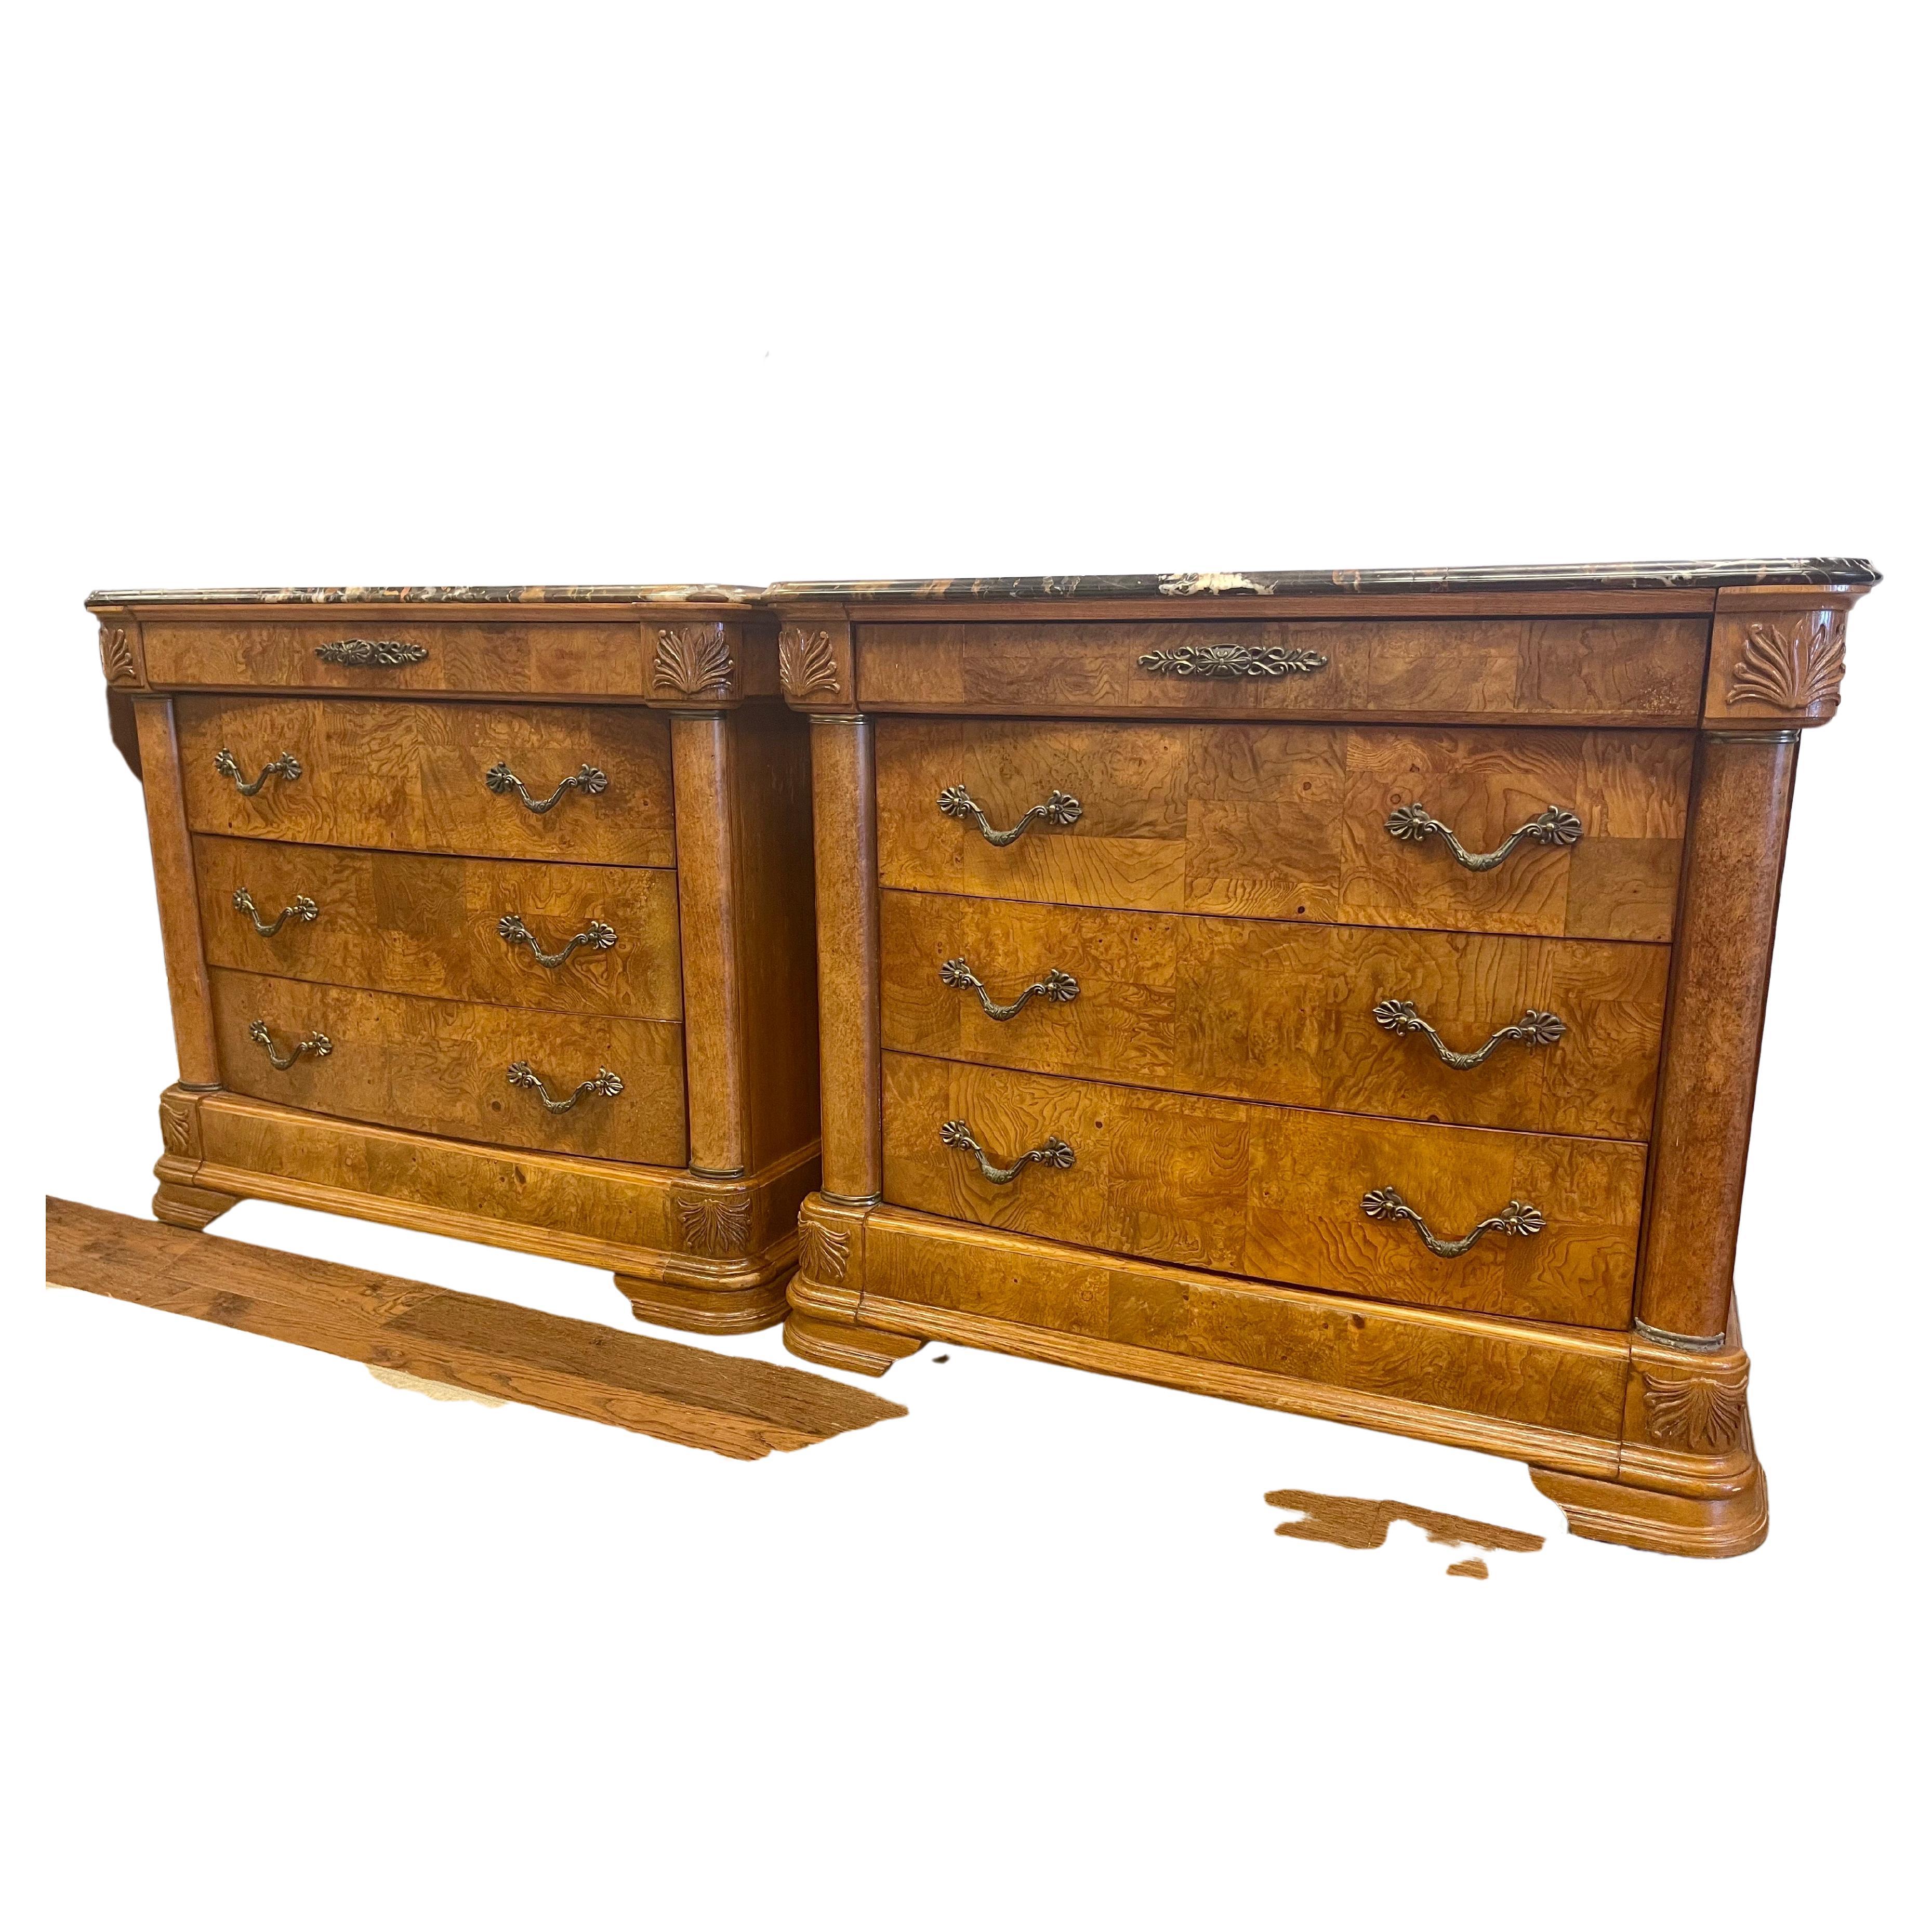 Elegant pair of marble top American Drew four drawer dressers featuring three larger drawers at bottom and one smaller drawer at top. Walnut body with beautiful graining; original metal reticulated hardware and gorgeous marble tops with brown and